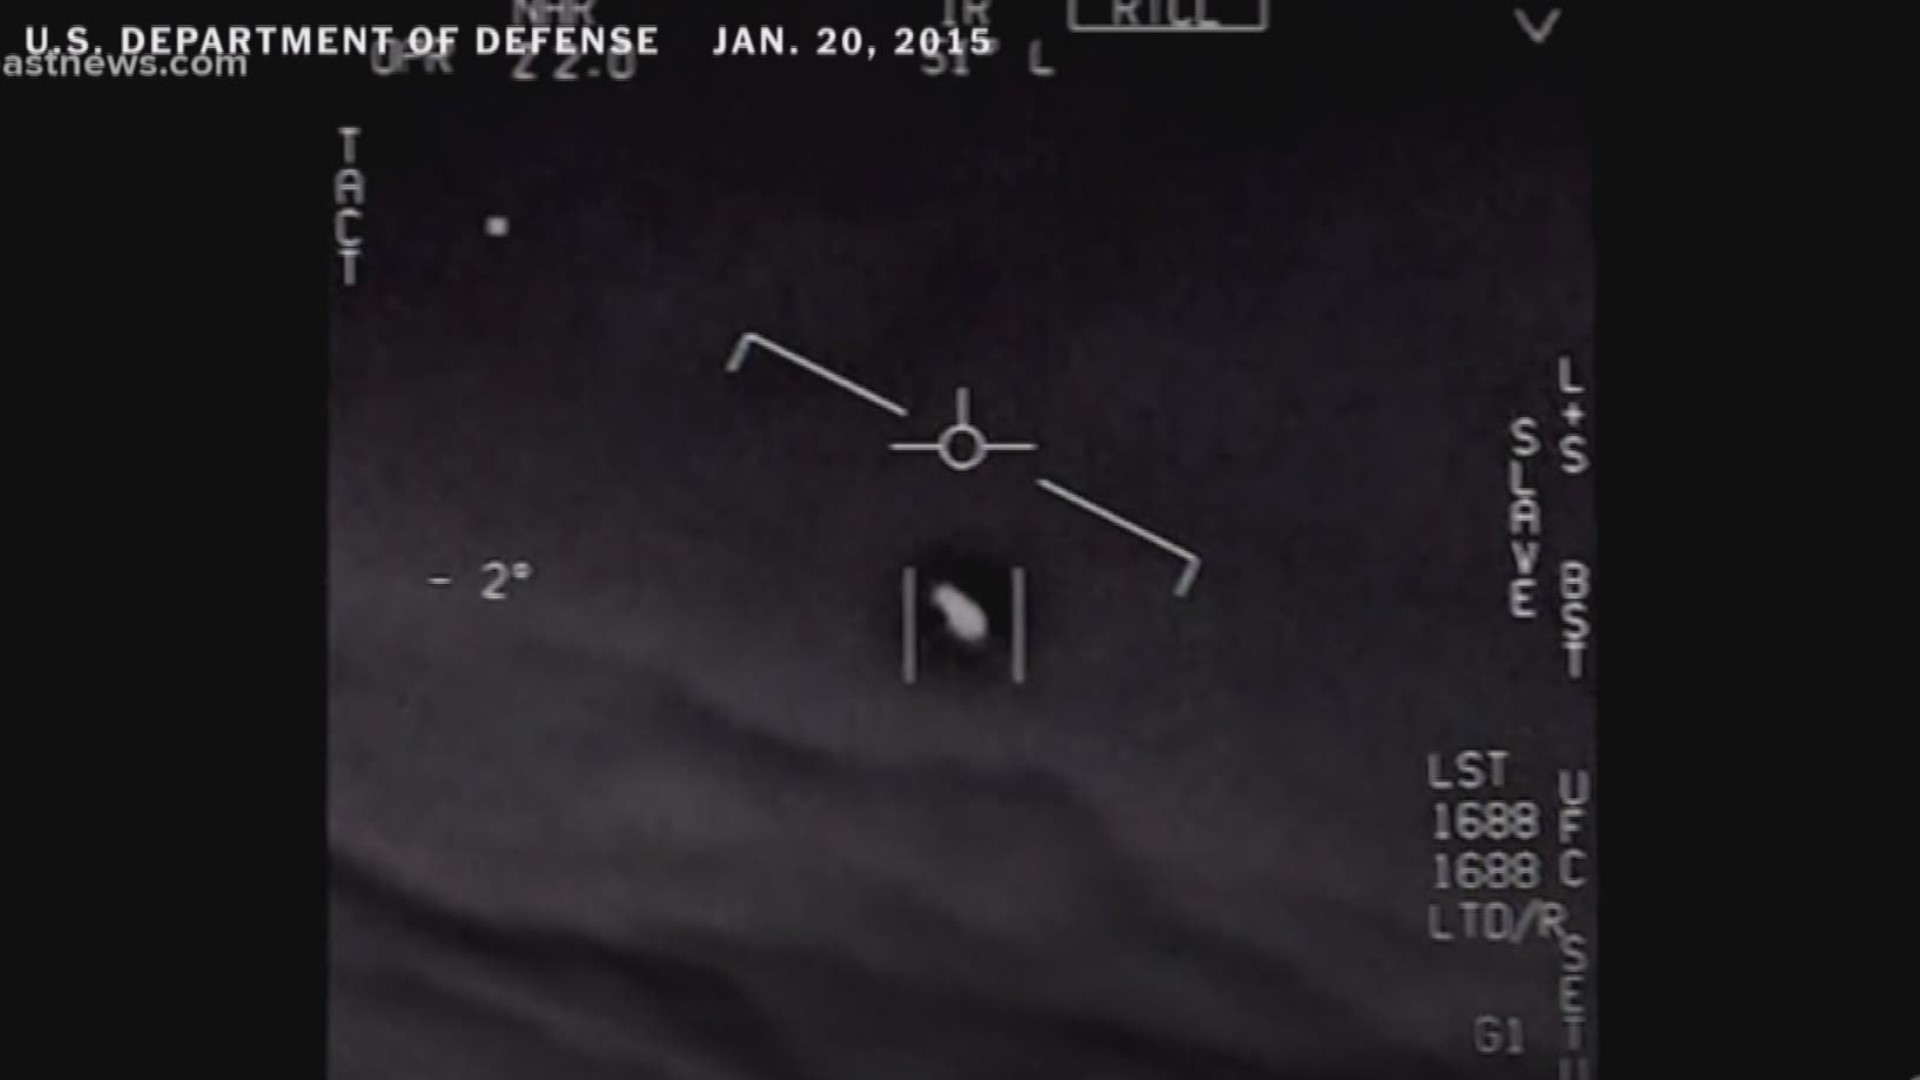 Some strange flying objects were spotted flying off the coast of Northeast Florida.